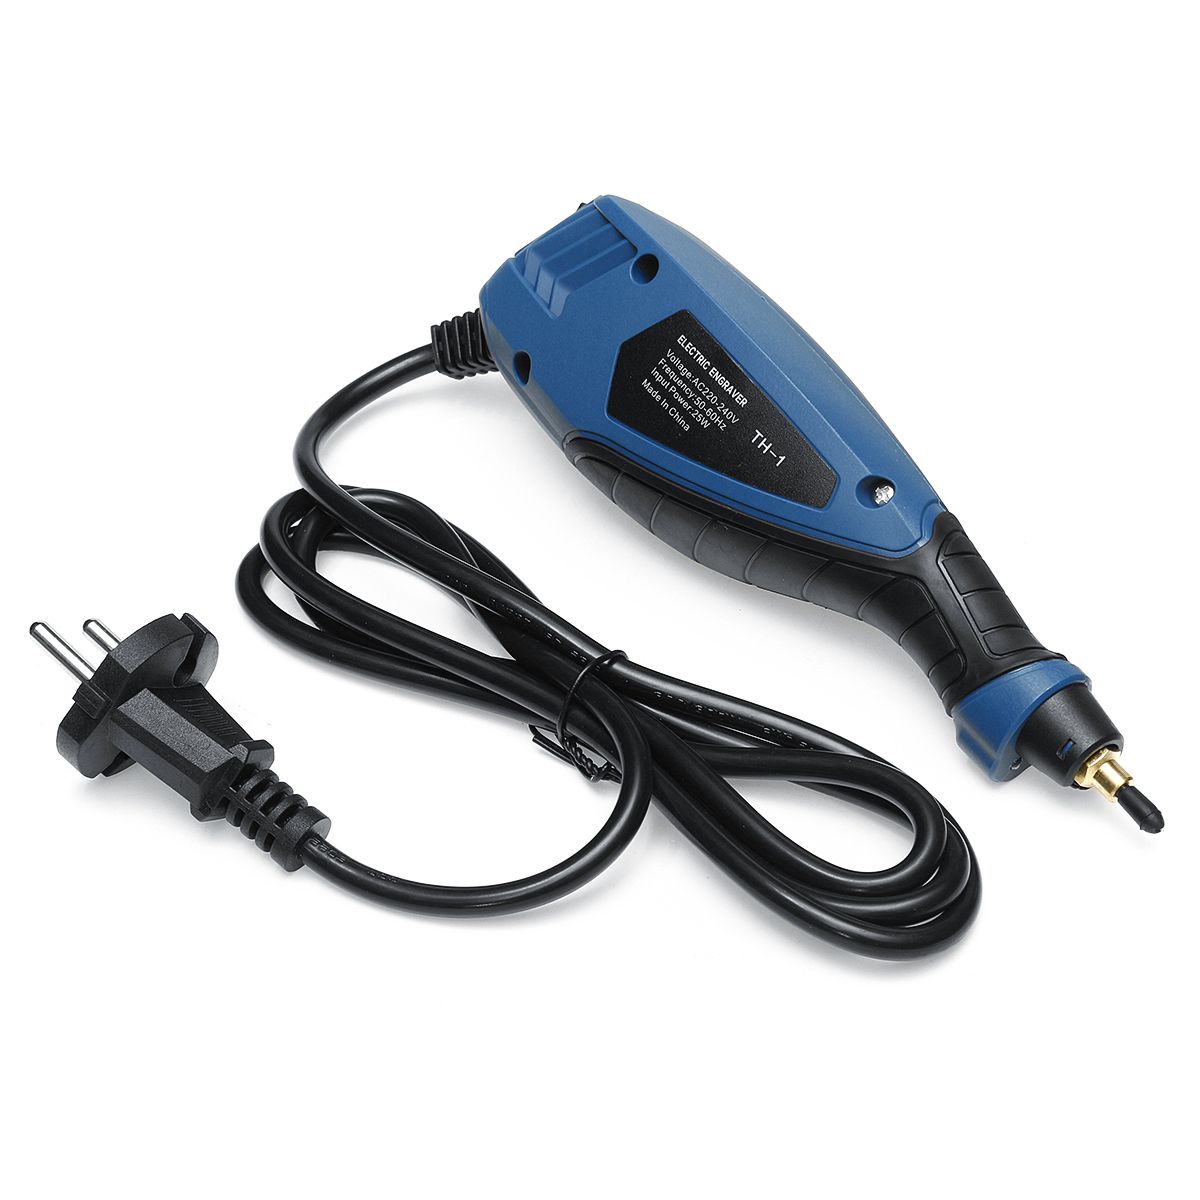 220V-25W-Dremel-Electric-Engraver-Carving-Jewelry-Wood-Metal-Hand-Engraving-Pen-1298729